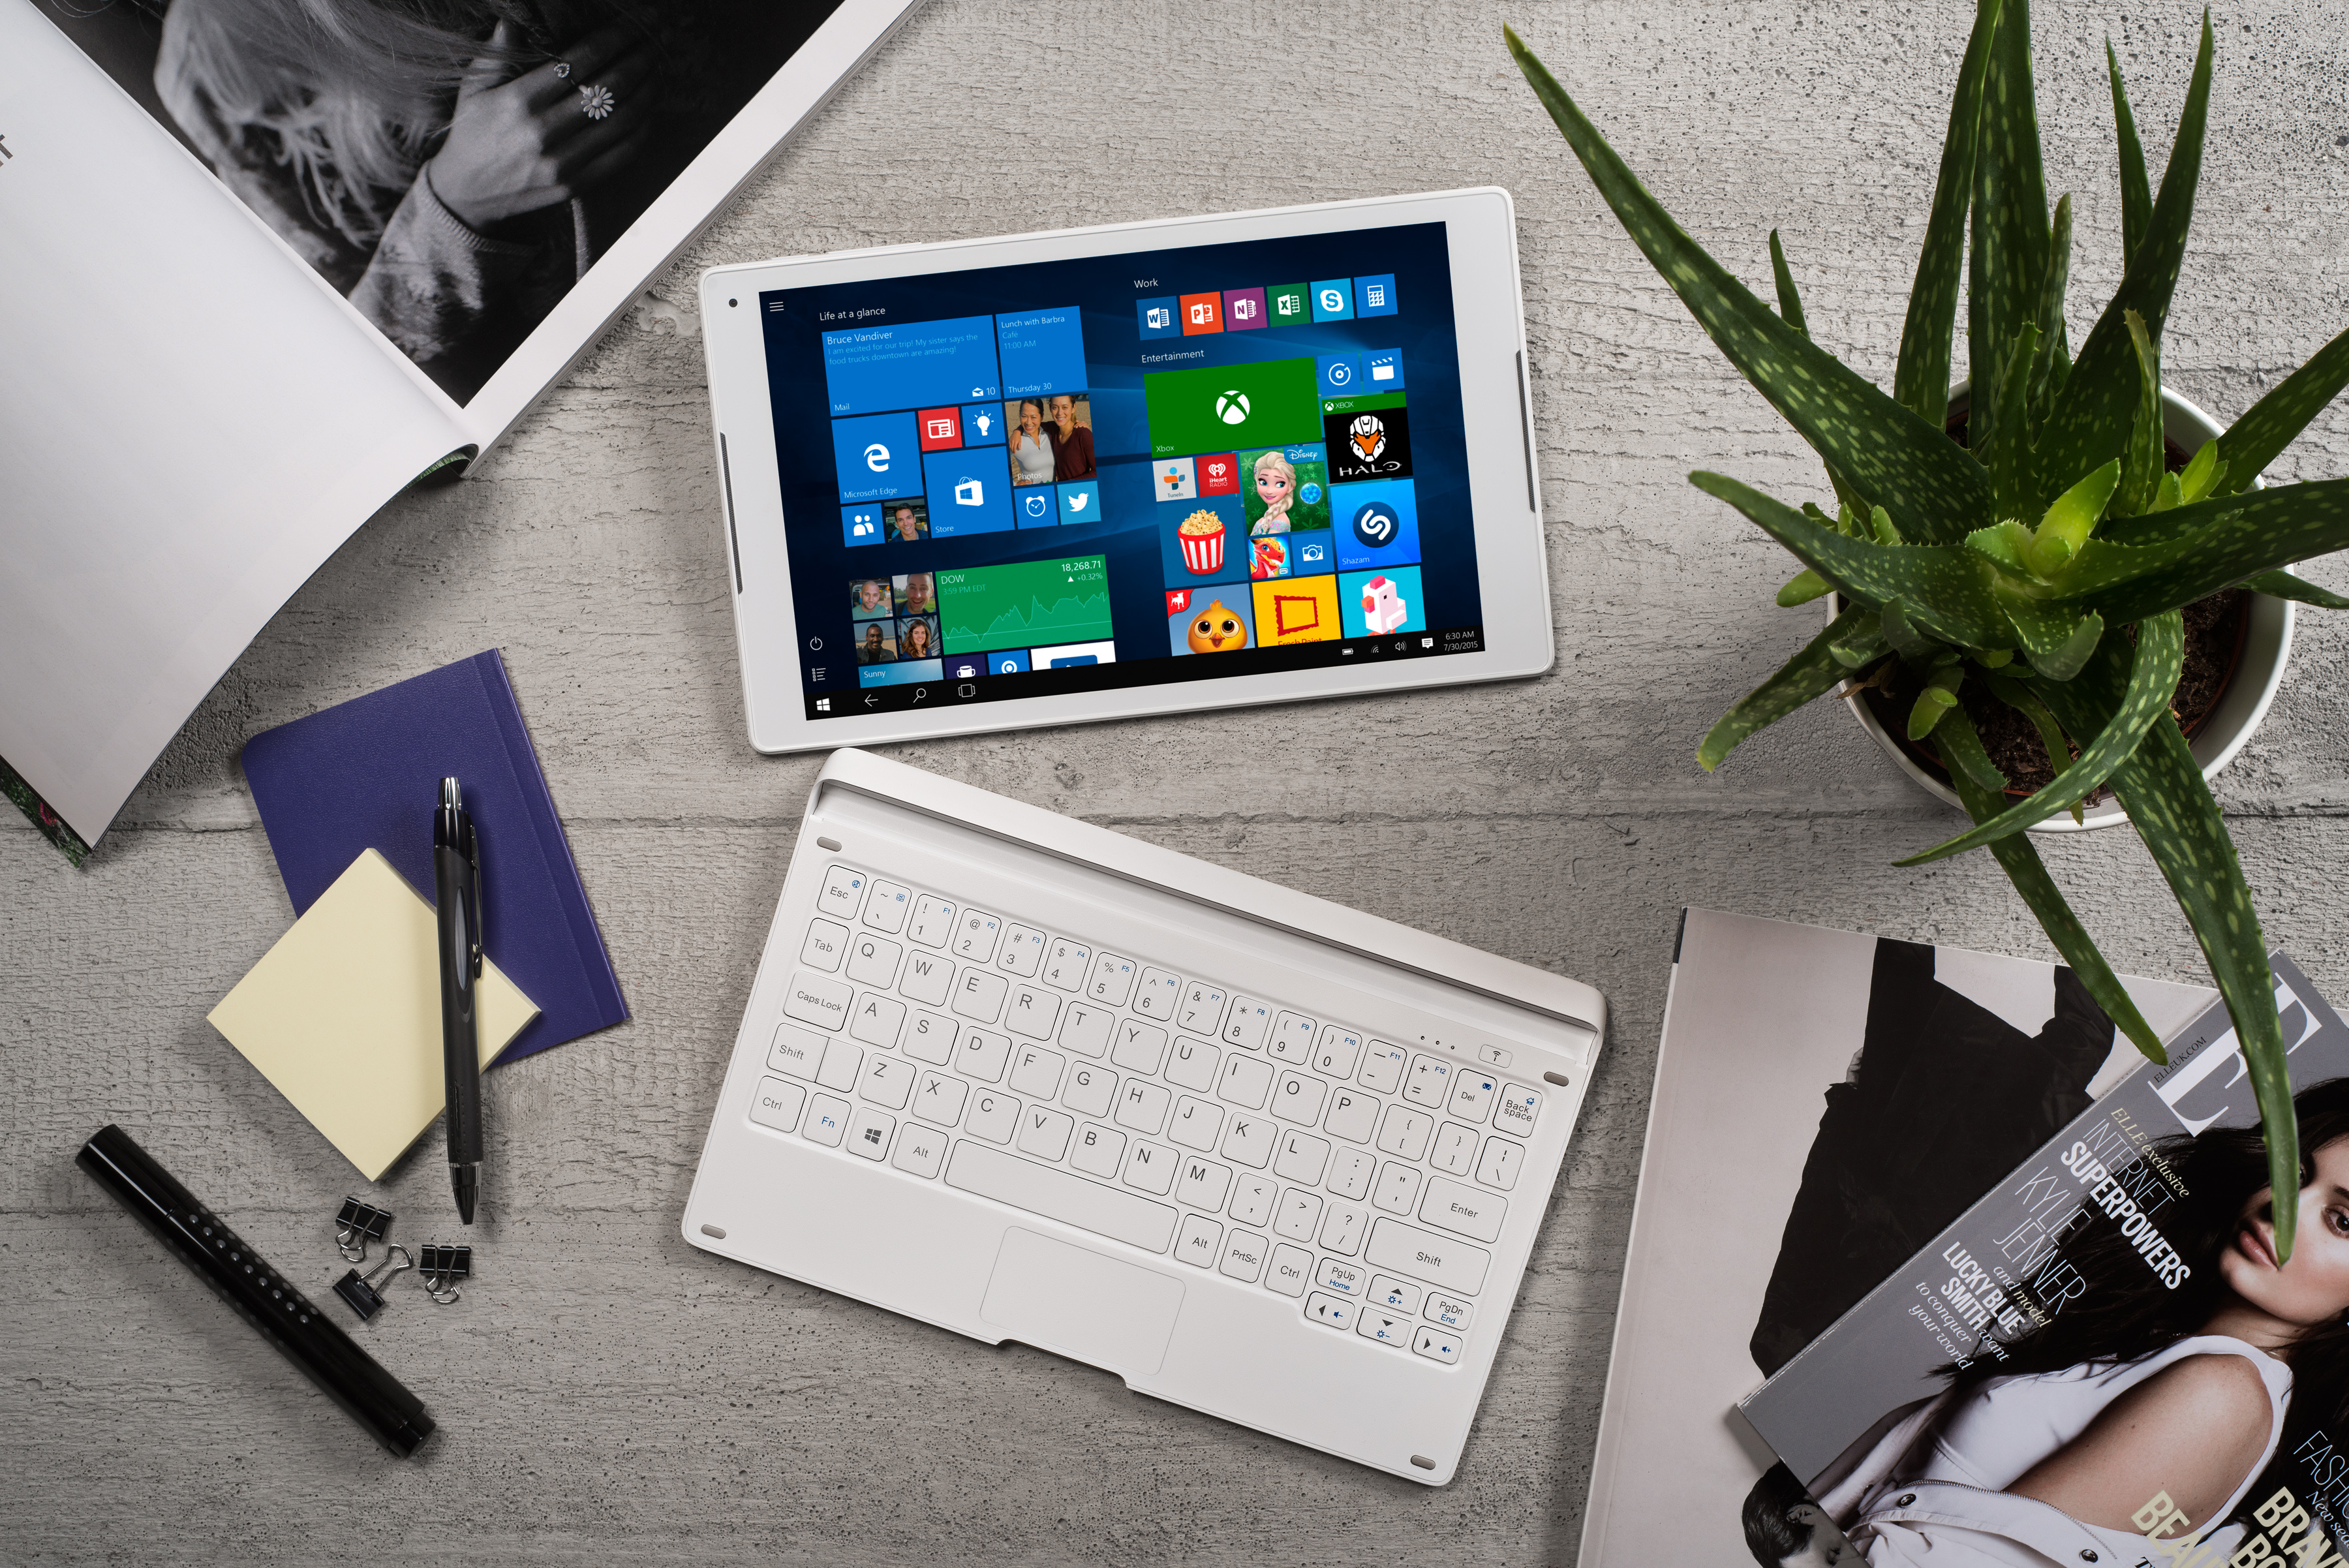 ALCATEL announced their new ALCATEL PLUS 10, a beautiful 10 inch 2-in-1 device powered by Windows 10